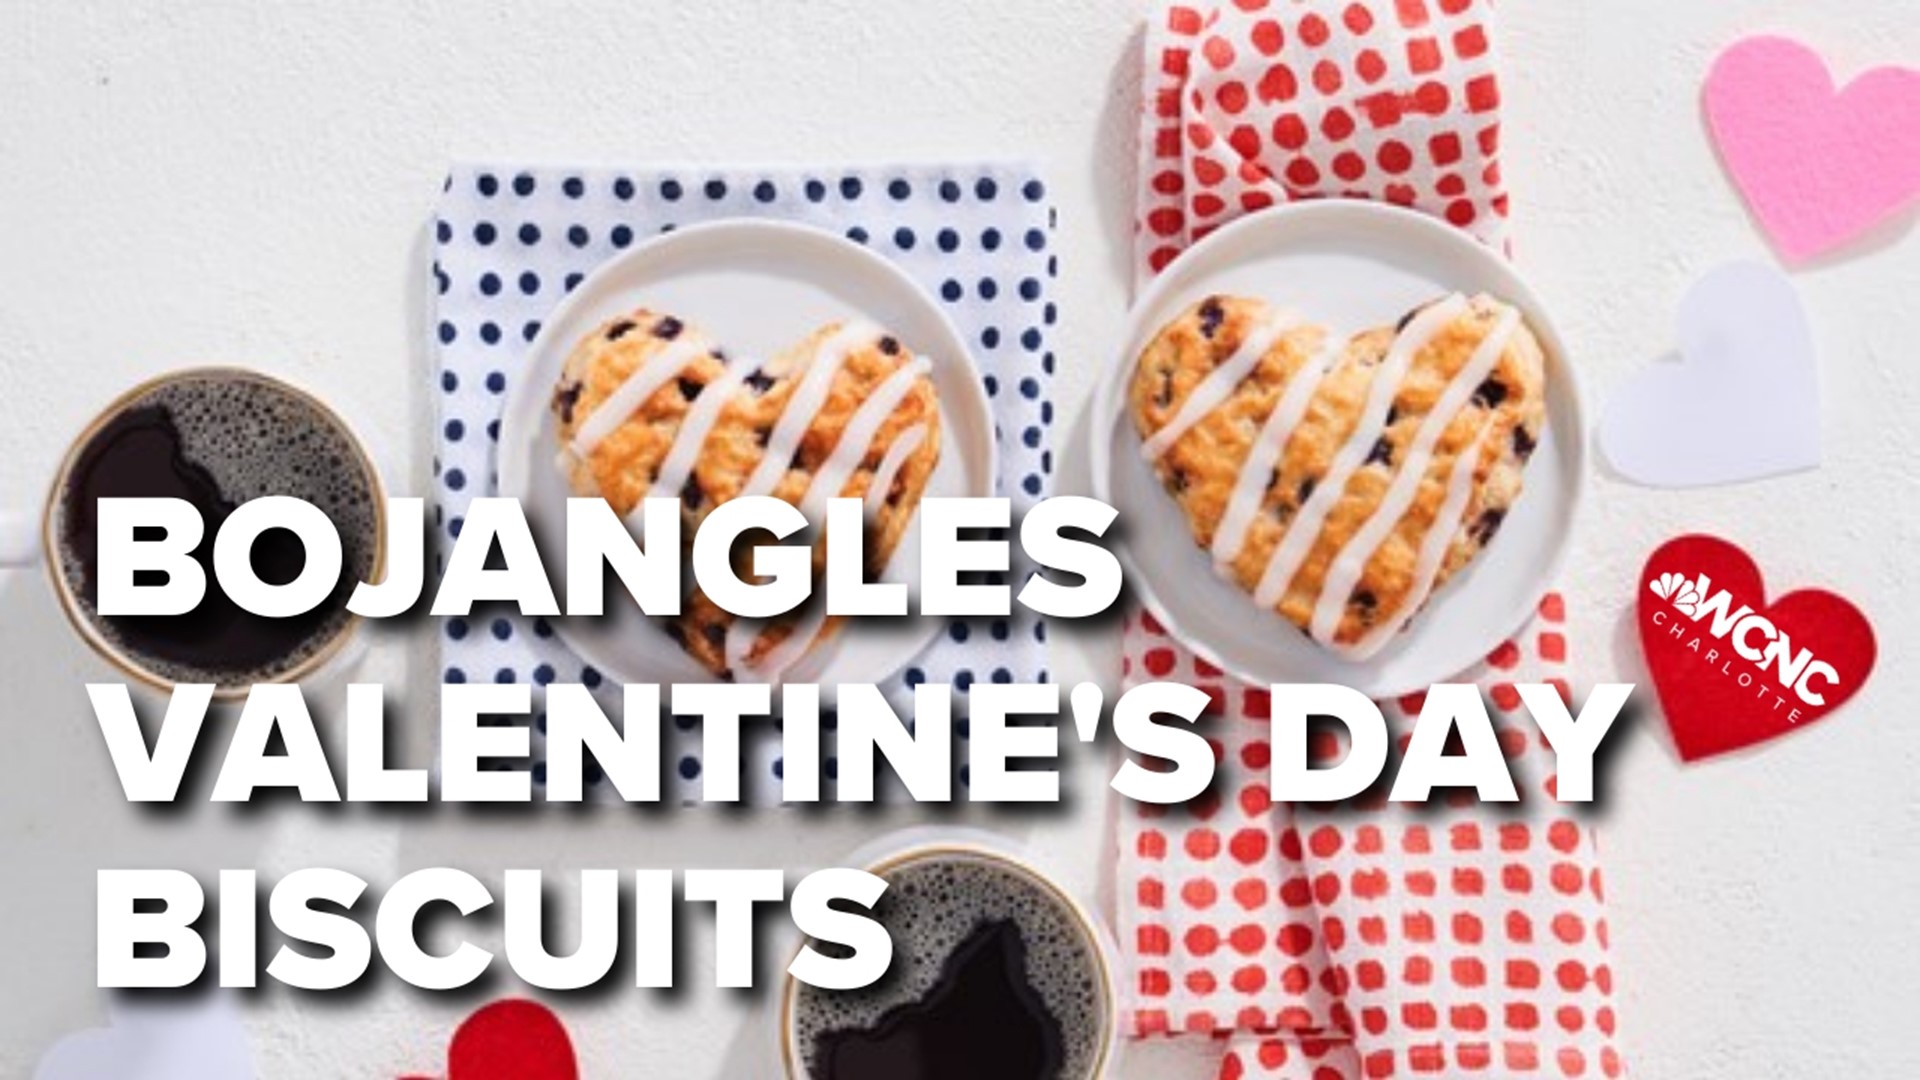 Forget the flowers, Bo-Berries are the way to go this Valentine's Day